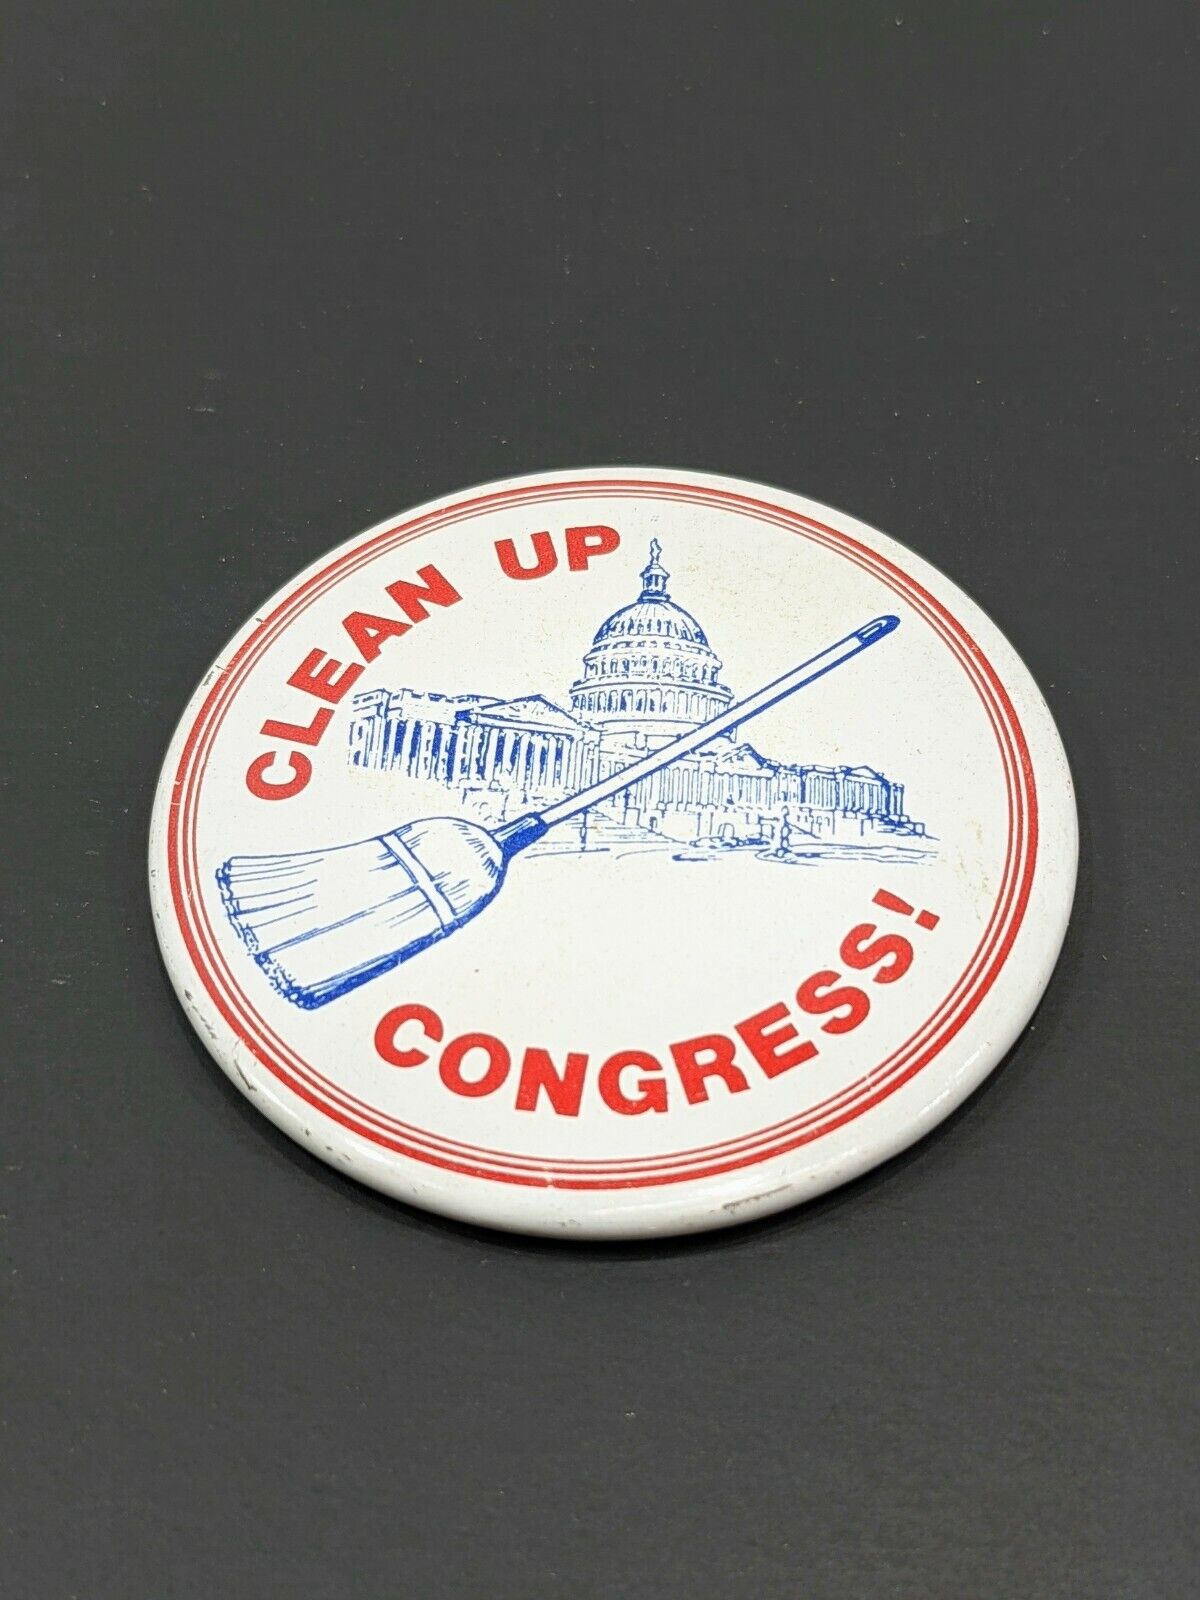 Vintage Clean Up Congress Campaign Button - Clean the Swamp                    